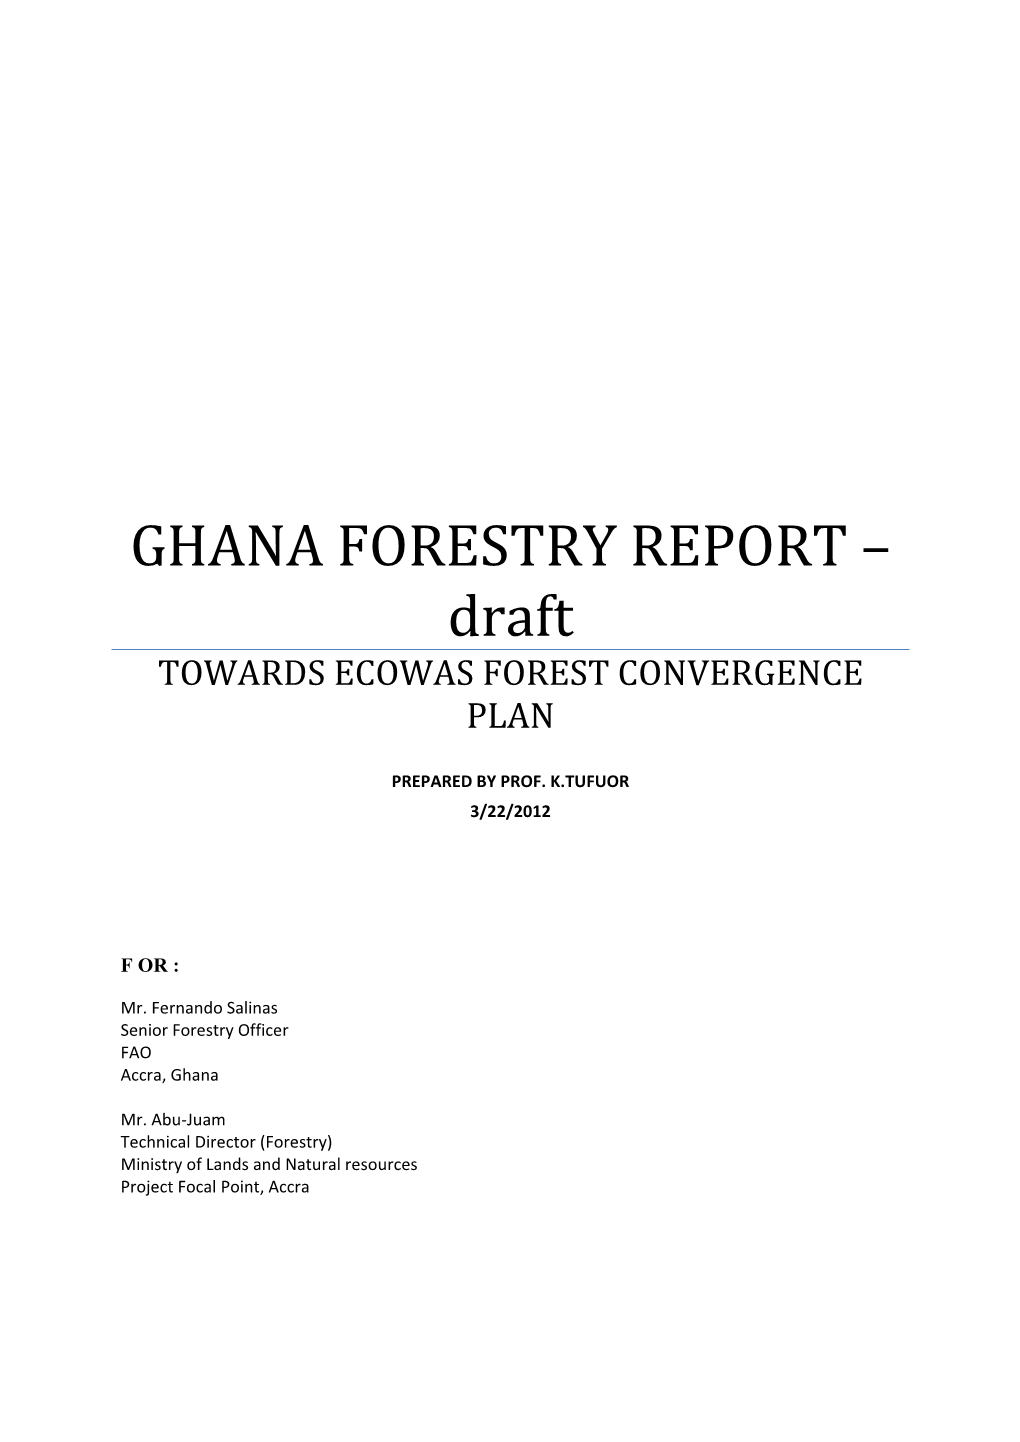 GHANA FORESTRY REPORT – Draft TOWARDS ECOWAS FOREST CONVERGENCE PLAN